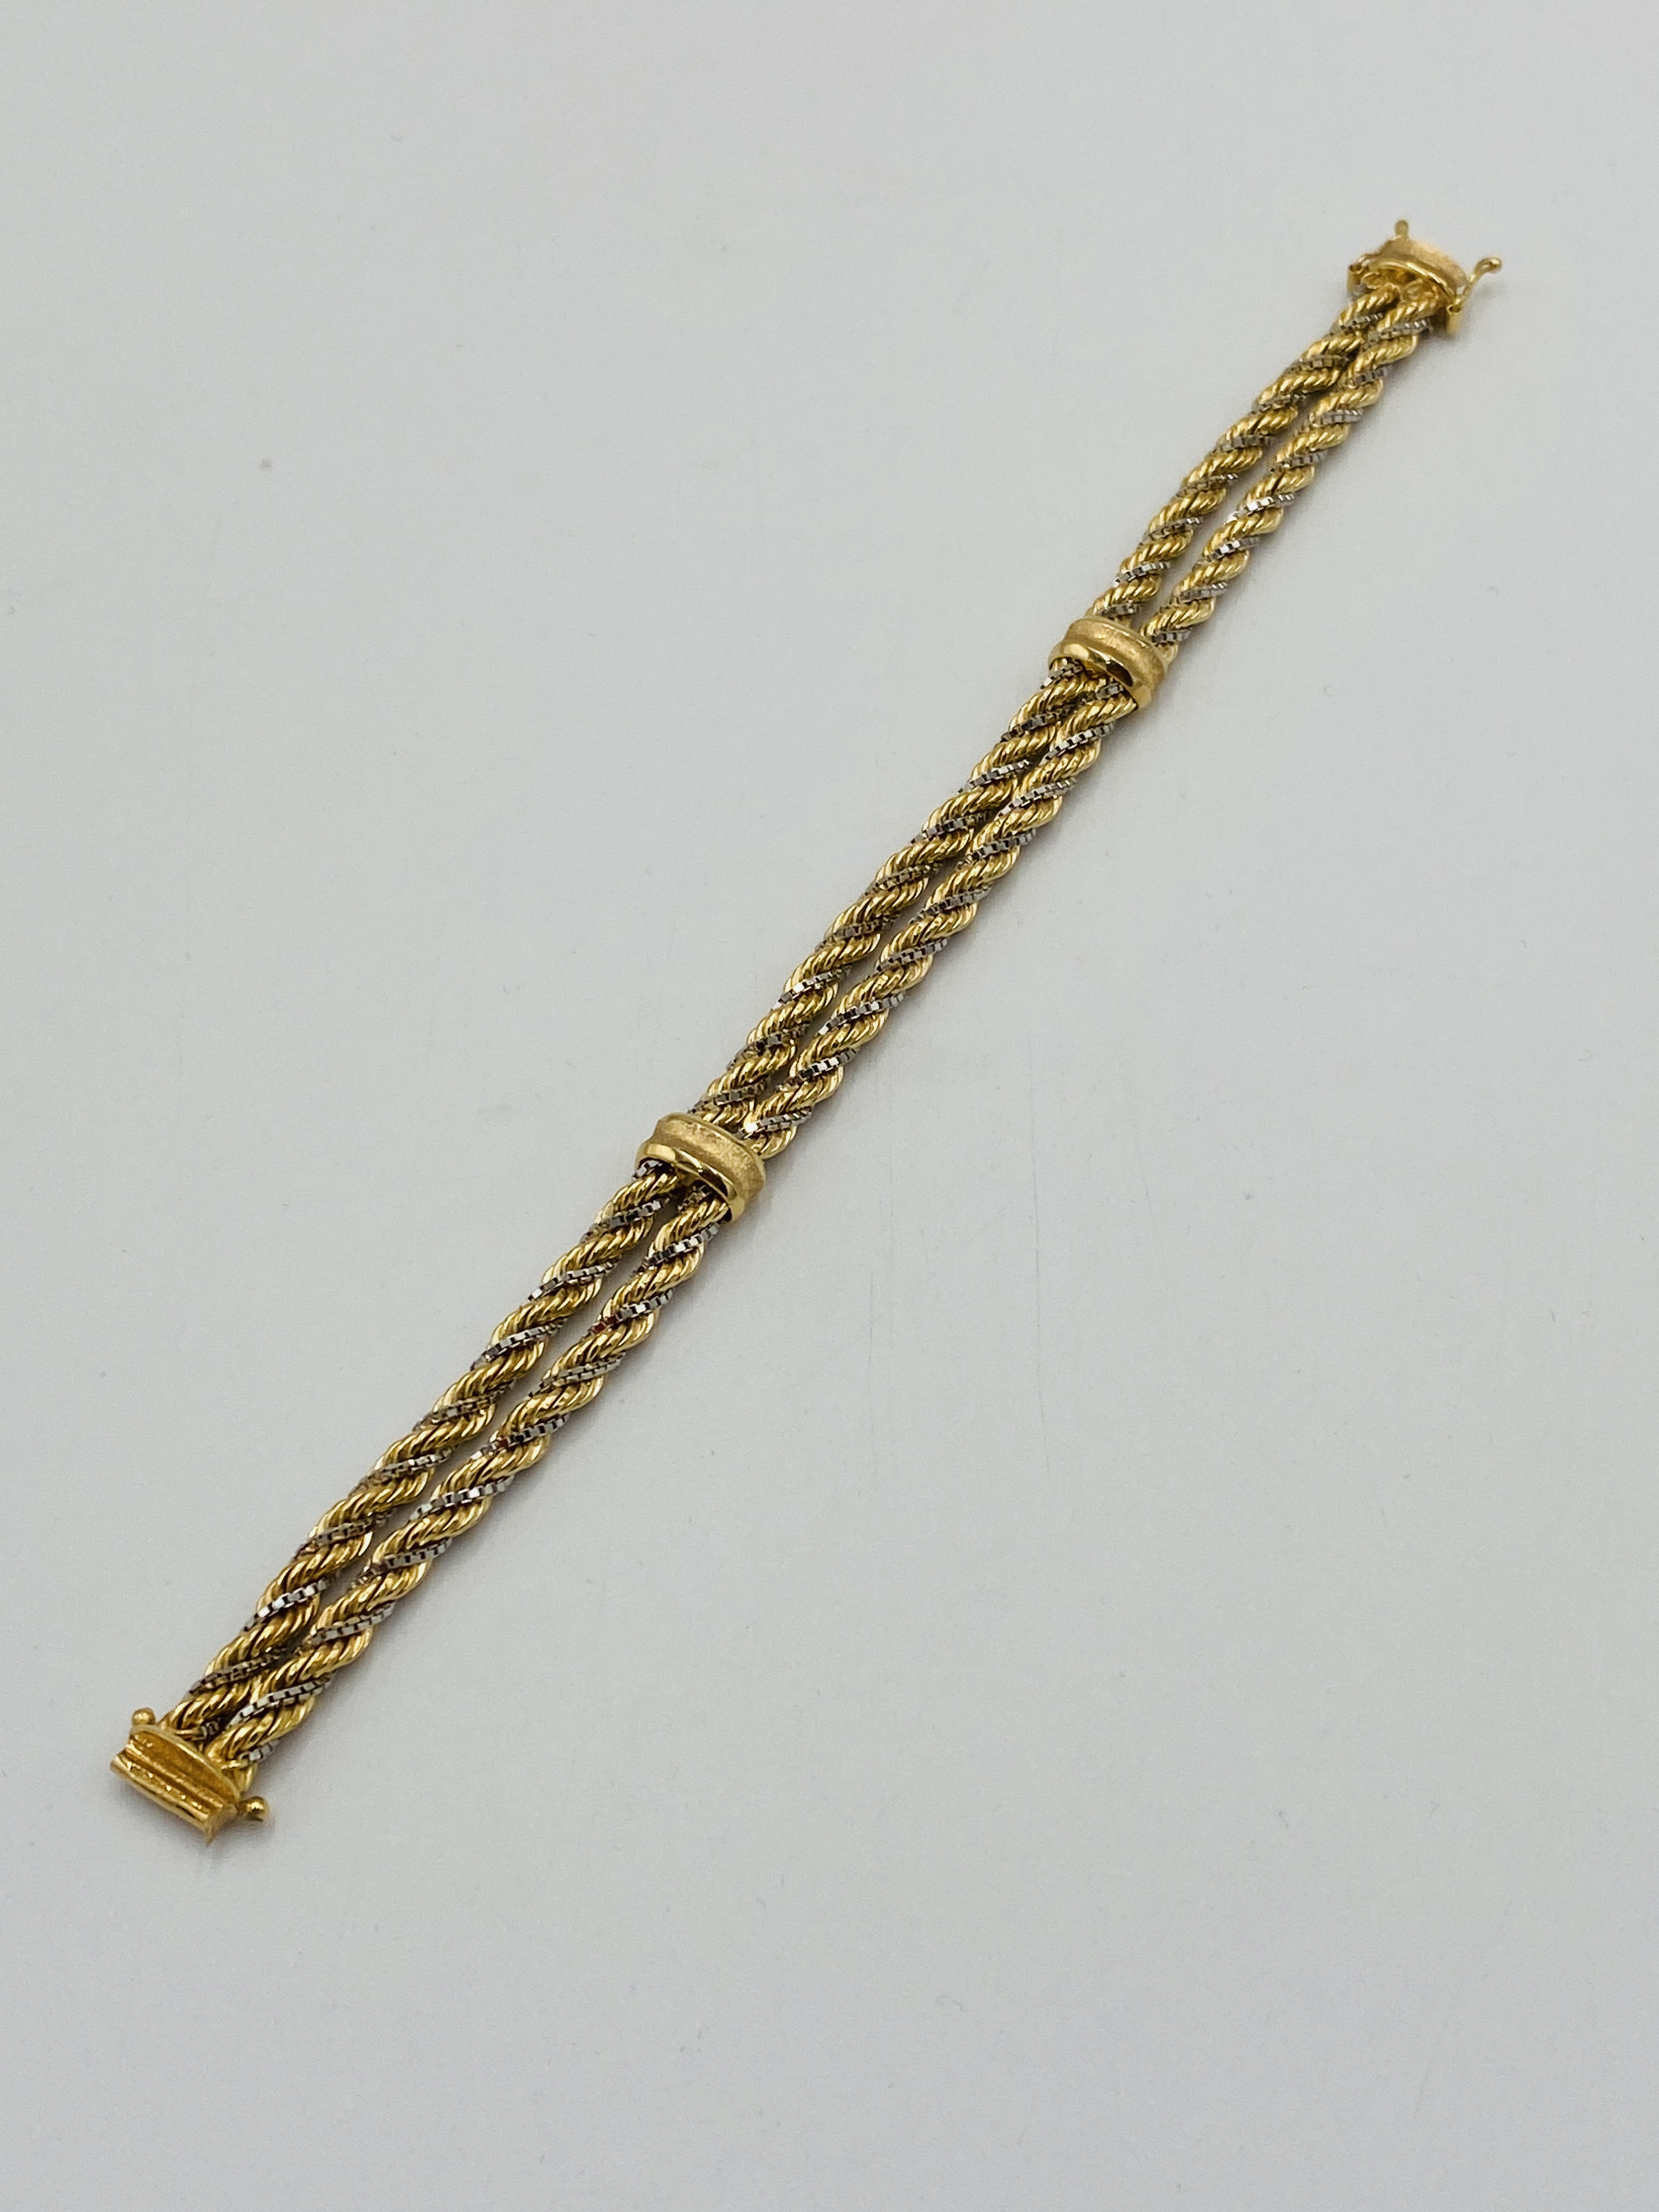 9ct gold and white metal rope twist bracelet - Image 2 of 6